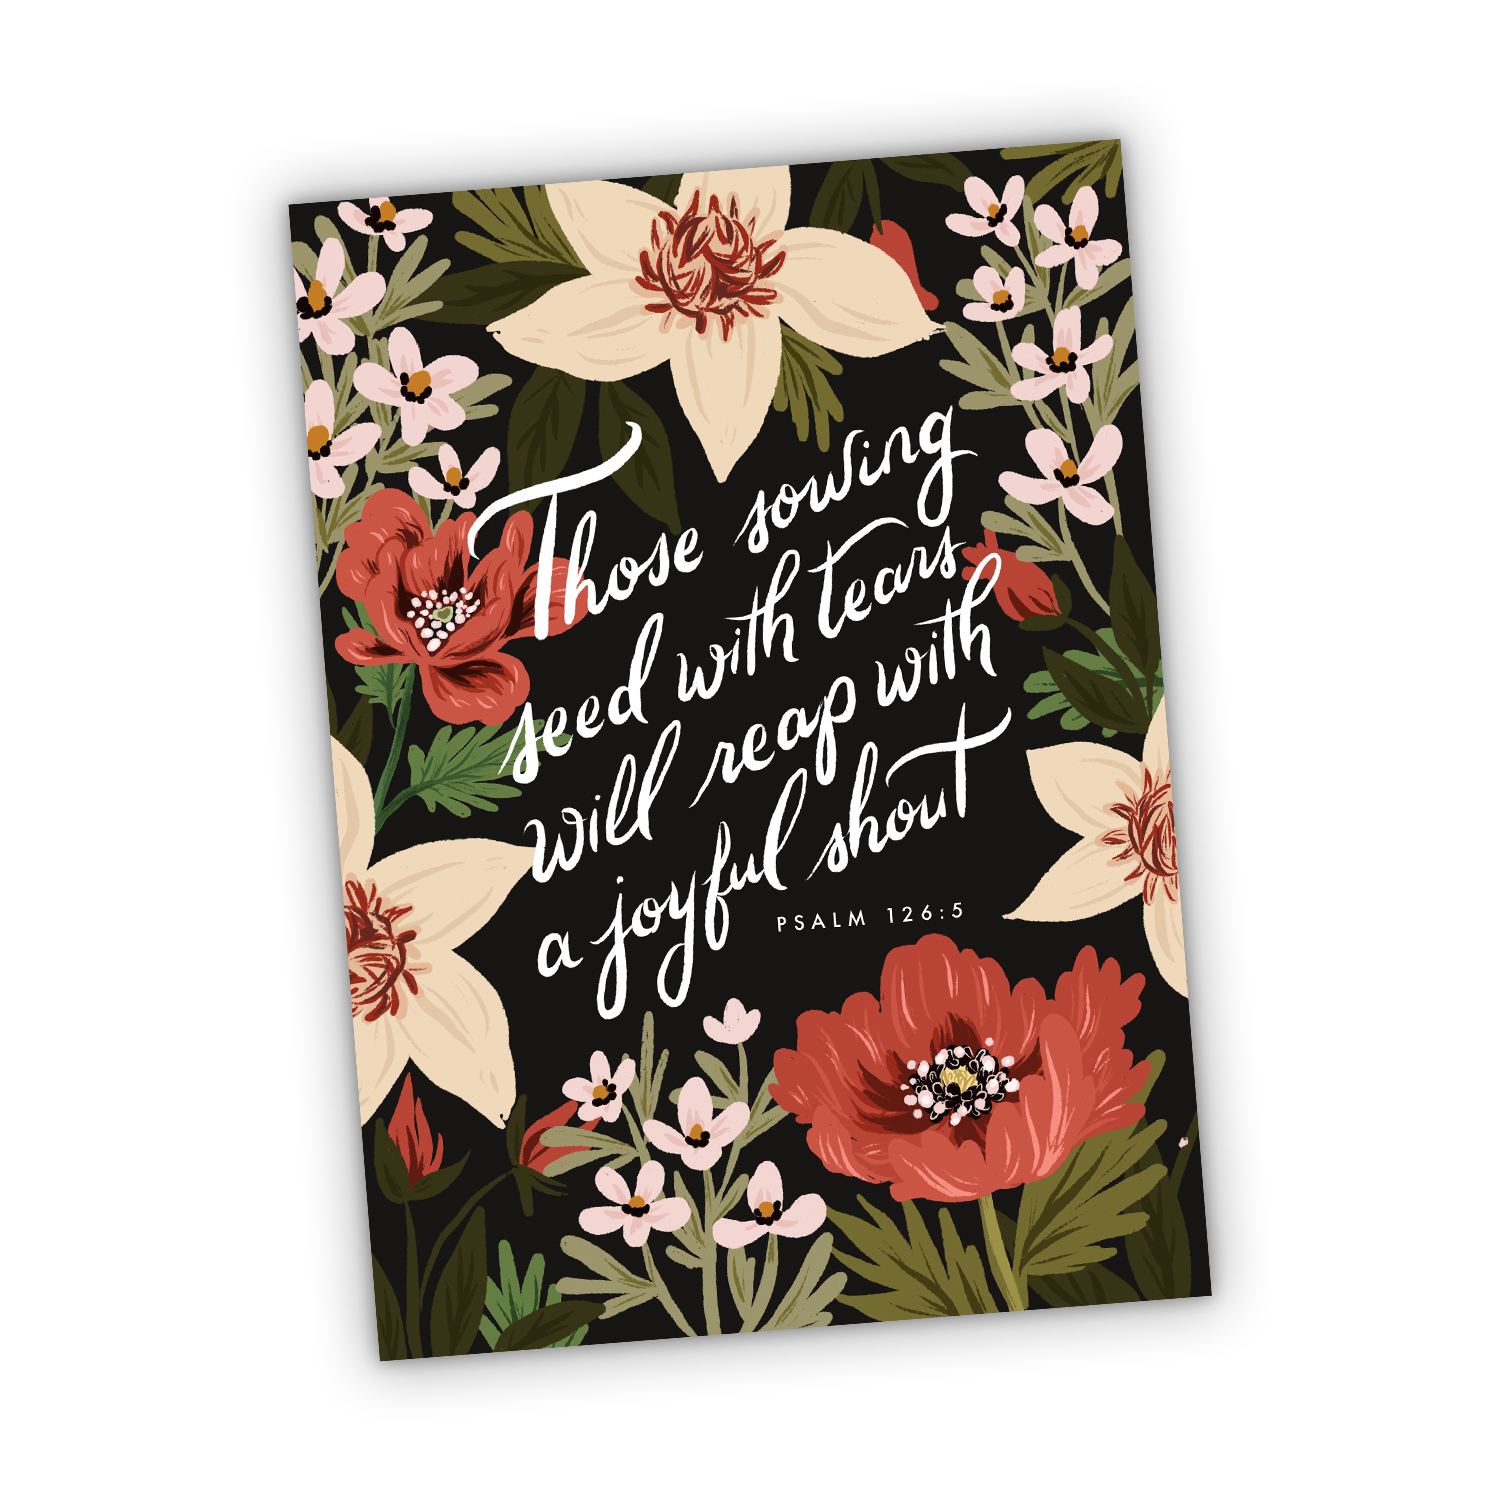 Those Sowing Seed With Tears Will Reap With a Joyful Shout - Psalm 126:5 Greeting Card